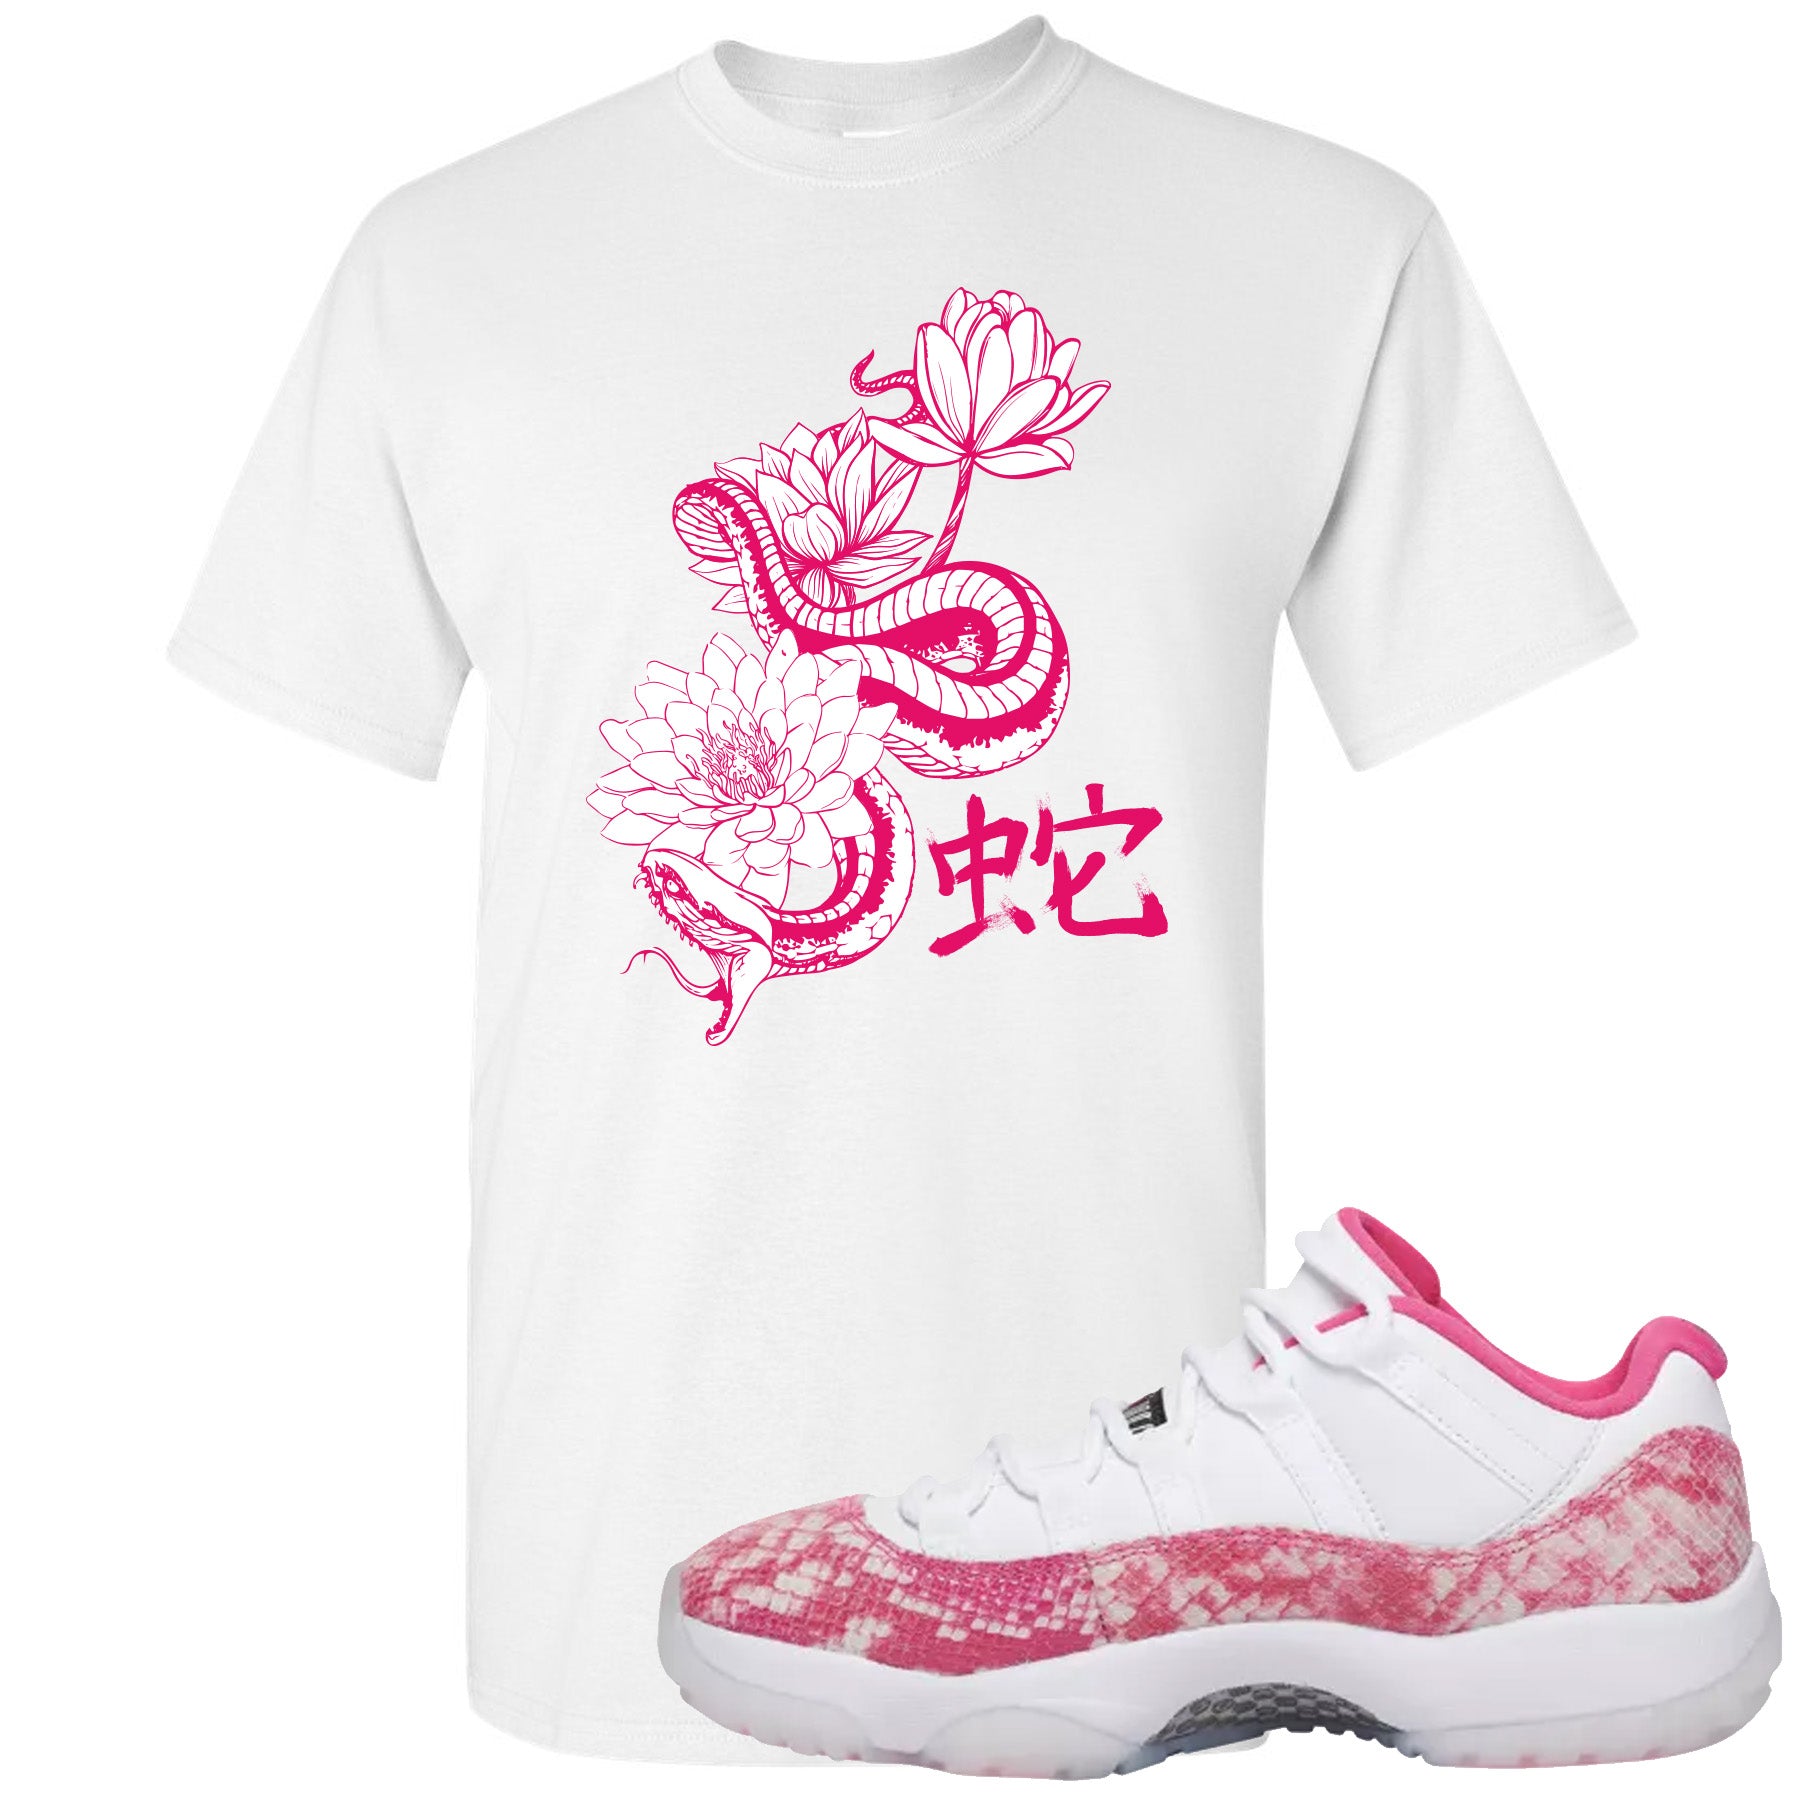 pink and white jordan outfit